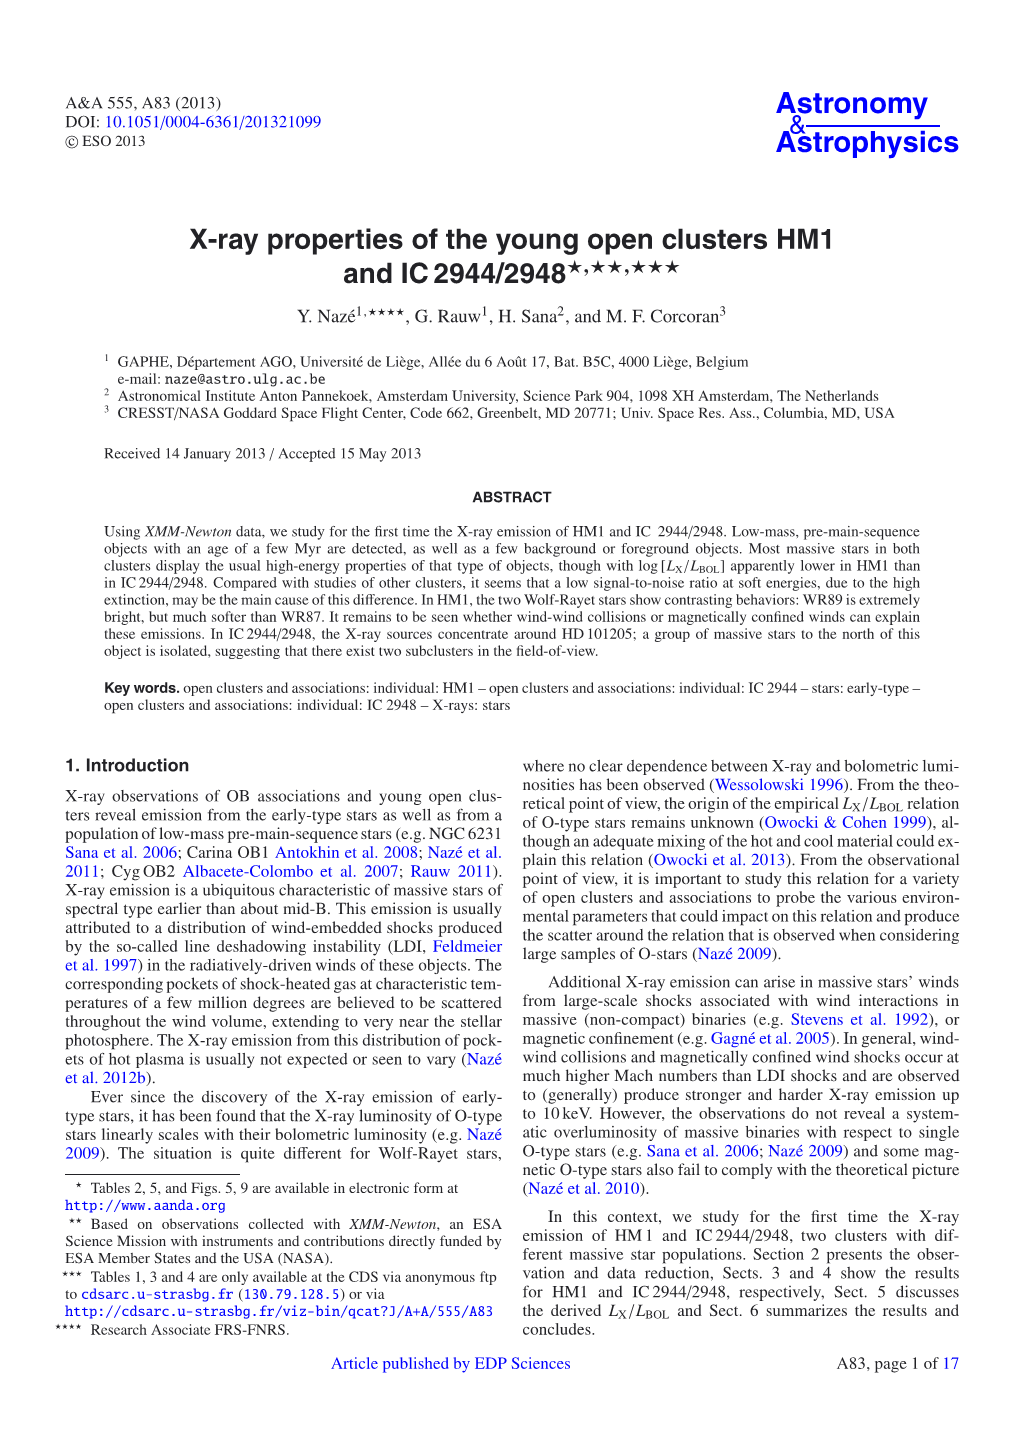 X-Ray Properties of the Young Open Clusters HM1 and IC 2944/2948⋆⋆⋆⋆⋆⋆